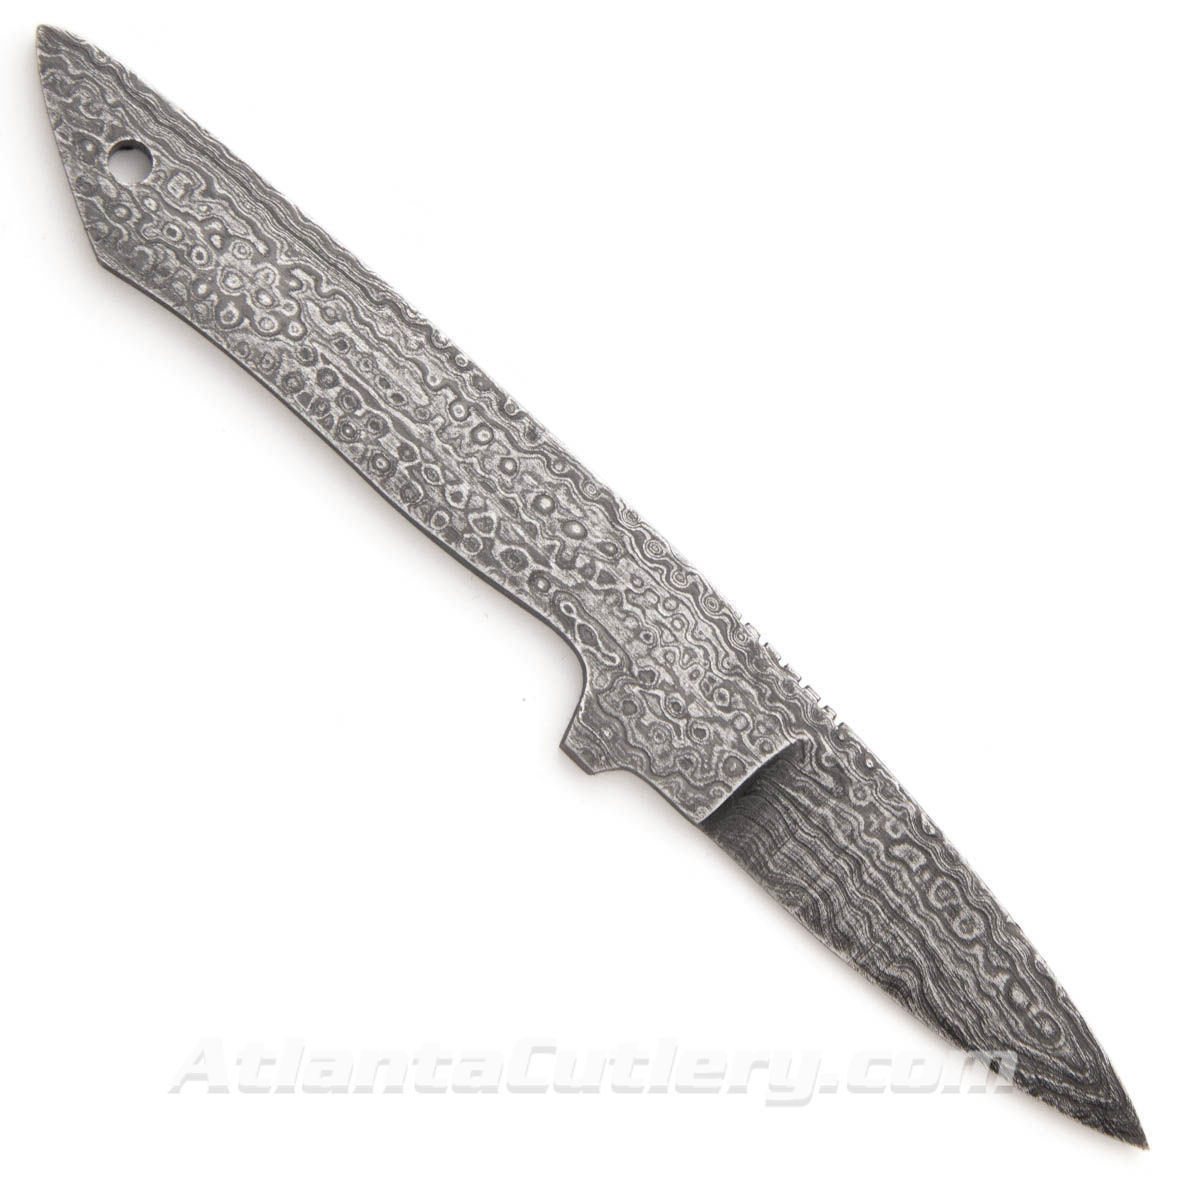 Knife Blank - Damascus Utility Knife with 2-1/4" Drop Point Blade